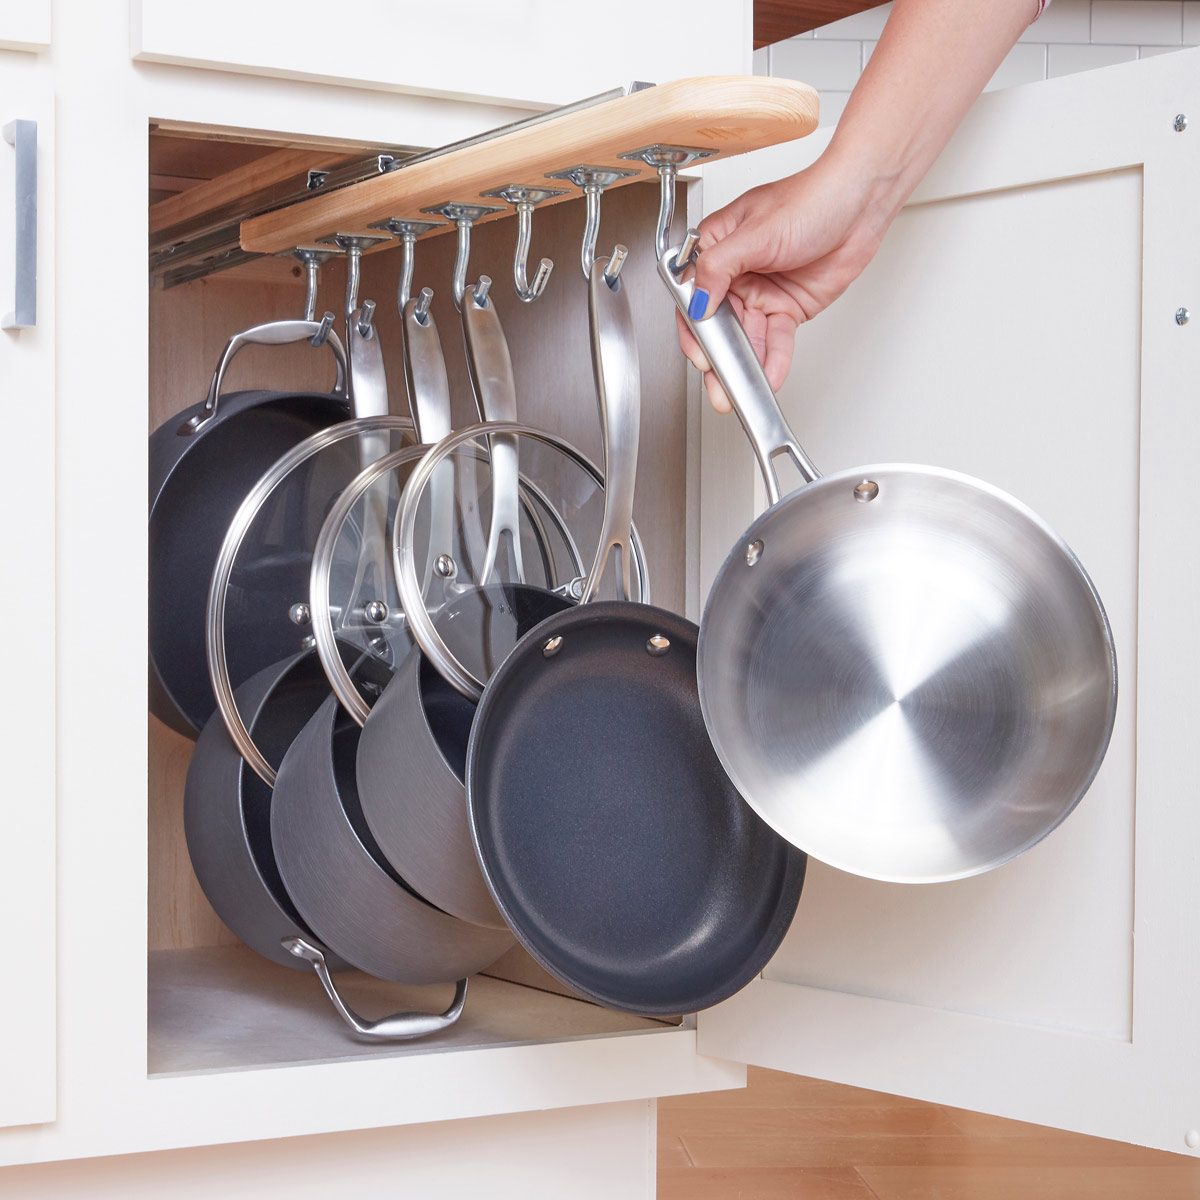 How to Make a Pot and Pan Pullout to Increase Kitchen Cabinet Storage (DIY)